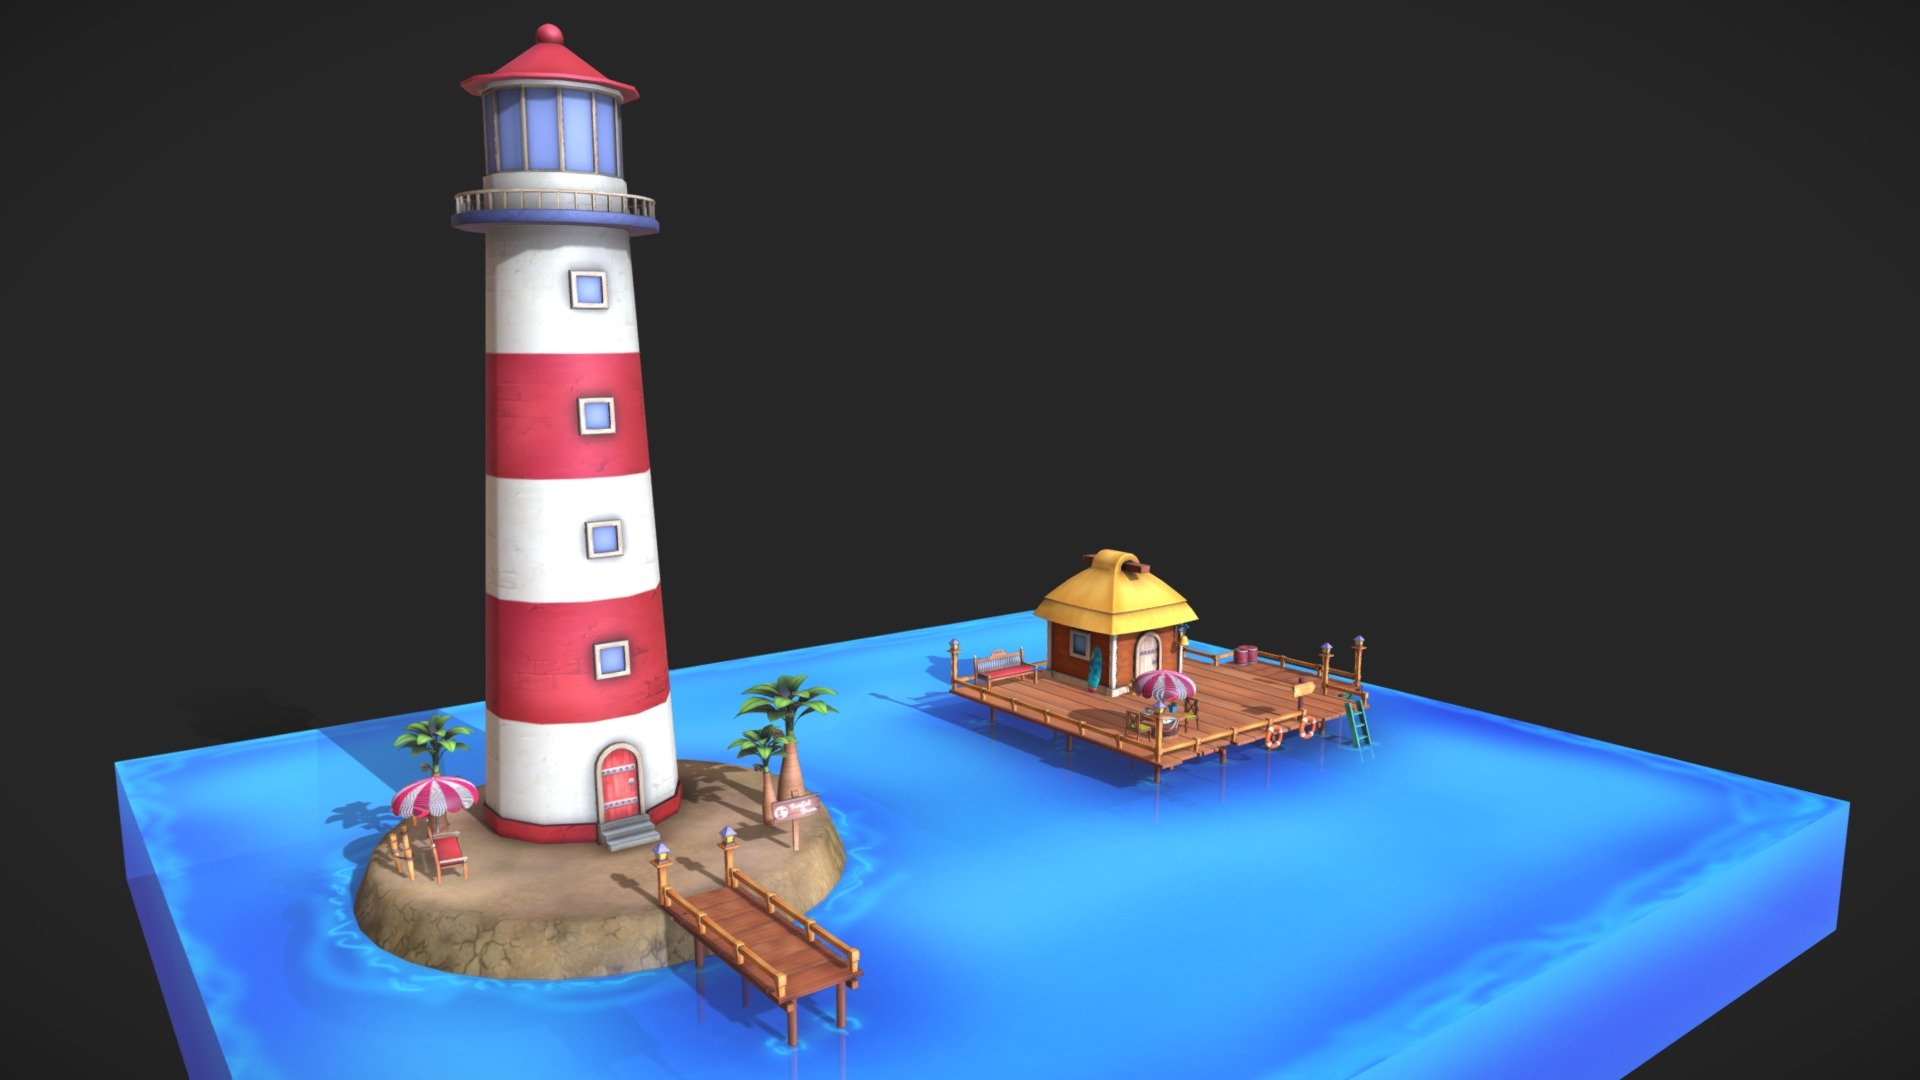 Game Ready, High-Quality Low Poly Models of Toon Port Environment.

Features :-





Completely Unwrapped assets




Consists of 15 High Quality and detailed textures along with 15 AO Maps.




All Materials Assigned Properly.




Consists of proper aligned Lighthouse &amp; Hut environments.




Models proportioned to Real-world Size.



Pack Contains :-

MODELS :




Packed with 25+ amazing different Models.

TEXTURES :




2048 X 2048 Resolution.

TRI COUNT :

Cup: 1048, Jug: 1196, Plate: 6016, Pot 1: 1672, Pot 2: 1412, Fence: 1360

Barrel: 1516, Crate: 552, Tube: 768, Hook: 160, Bell: 1088, Clapper: 324, Hanger: 2222

Chair: 222, Table: 672, Umbrella: 920, Bench: 1094, Pier Edge: 114, Pier Fence:  24

Sign Board1: 358, Sign Board 2: 218, Lamp: 246, Boat: 1248, Rope: 524, Oar: 236

Surf Board: 812, Ladder: 312, House Base: 728, Pier: 708, Pillar: 28

Hut: 1225, Tree: 9212, Lighthouse: 1797, Base: 608

We would love to hear your rating and comments.

Support email: tgamesassets@gmail.com - Toon Port Environment - Buy Royalty Free 3D model by TGamesAssets 3d model